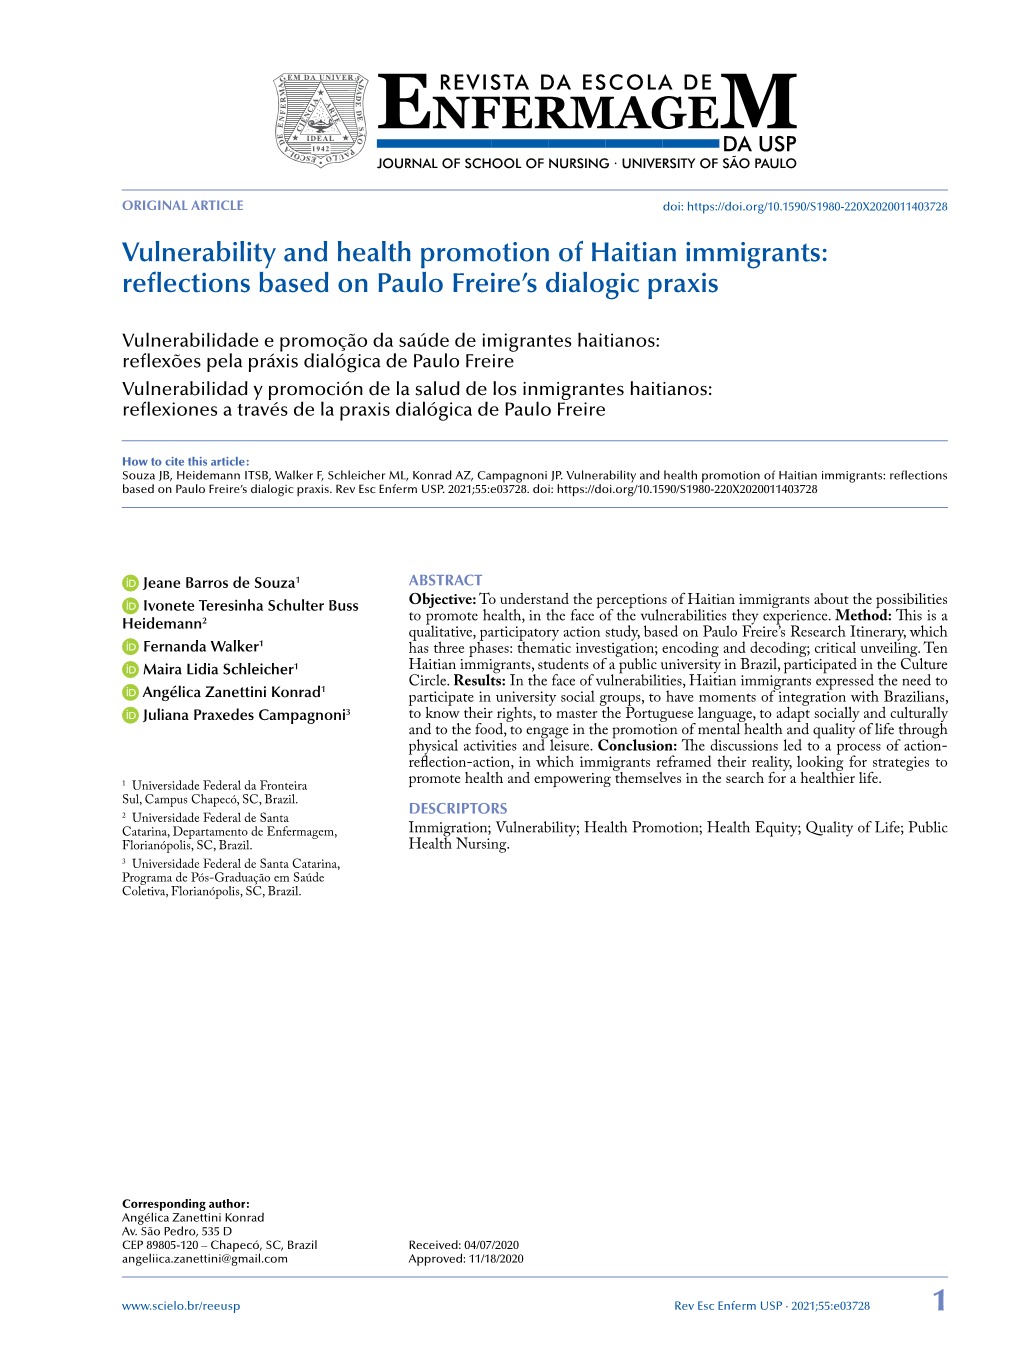 Vulnerability and Health Promotion of Haitian Immigrants: Reflections Based on Paulo Freire’S Dialogic Praxis